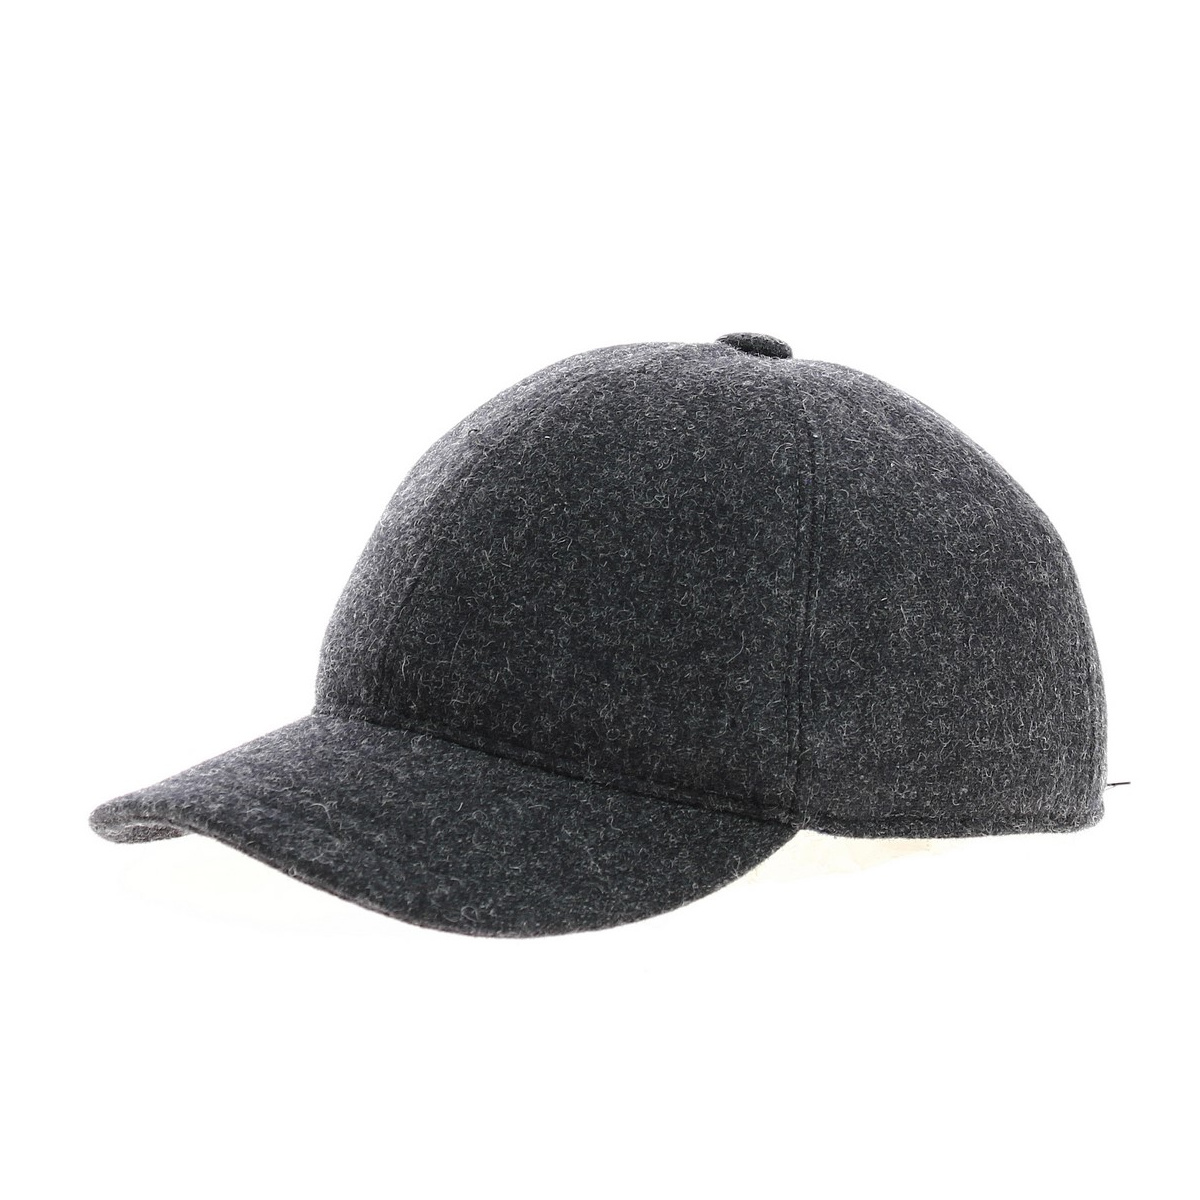 https://media2.chapellerie-traclet.com/88411-thickbox_default/casquette-sport-chine-gris-cache-oreille-traclet.jpg